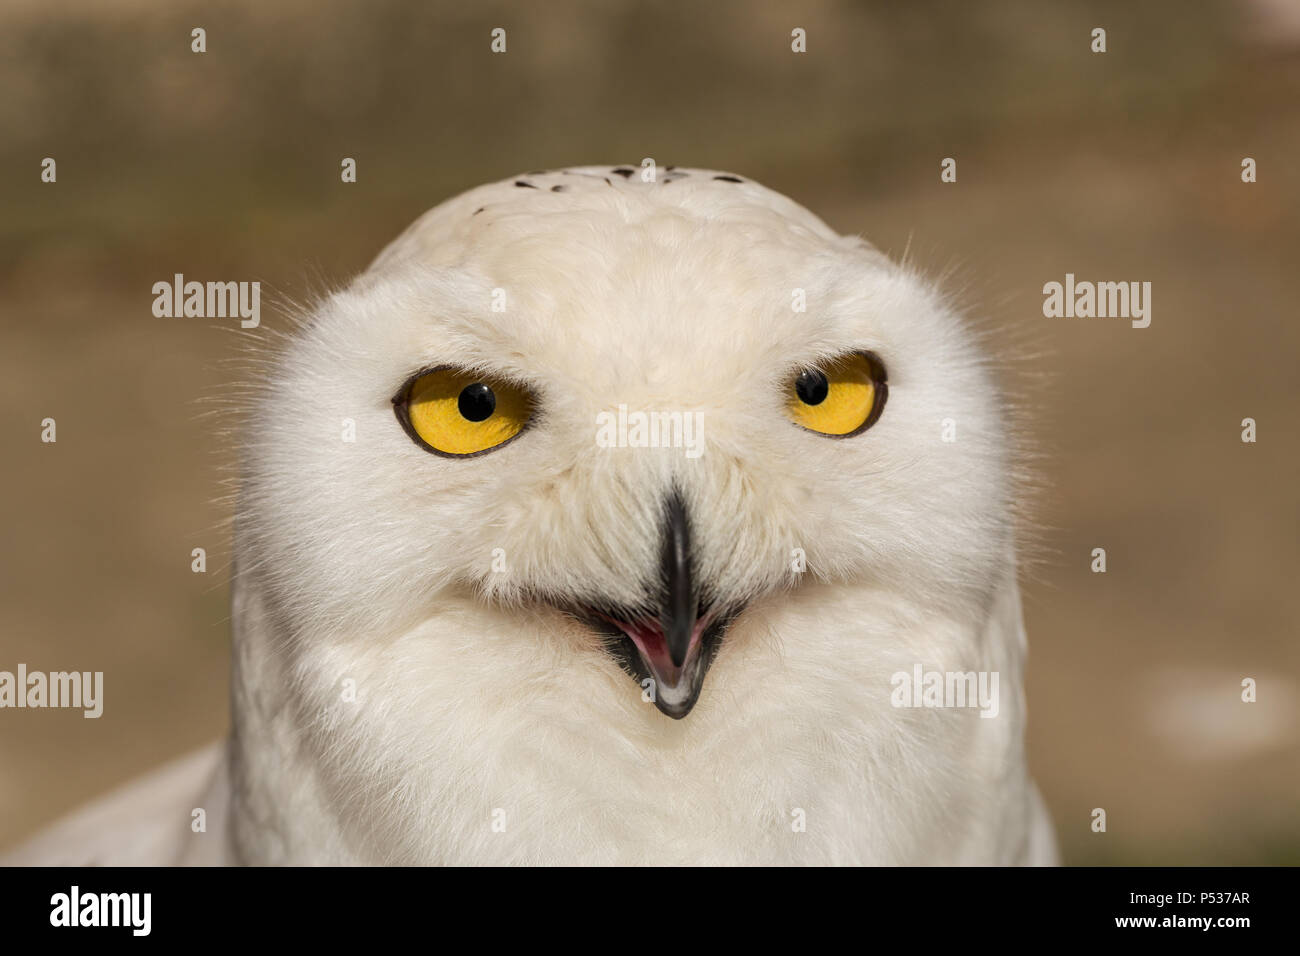 snowy owl looking at the camera portrait Stock Photo